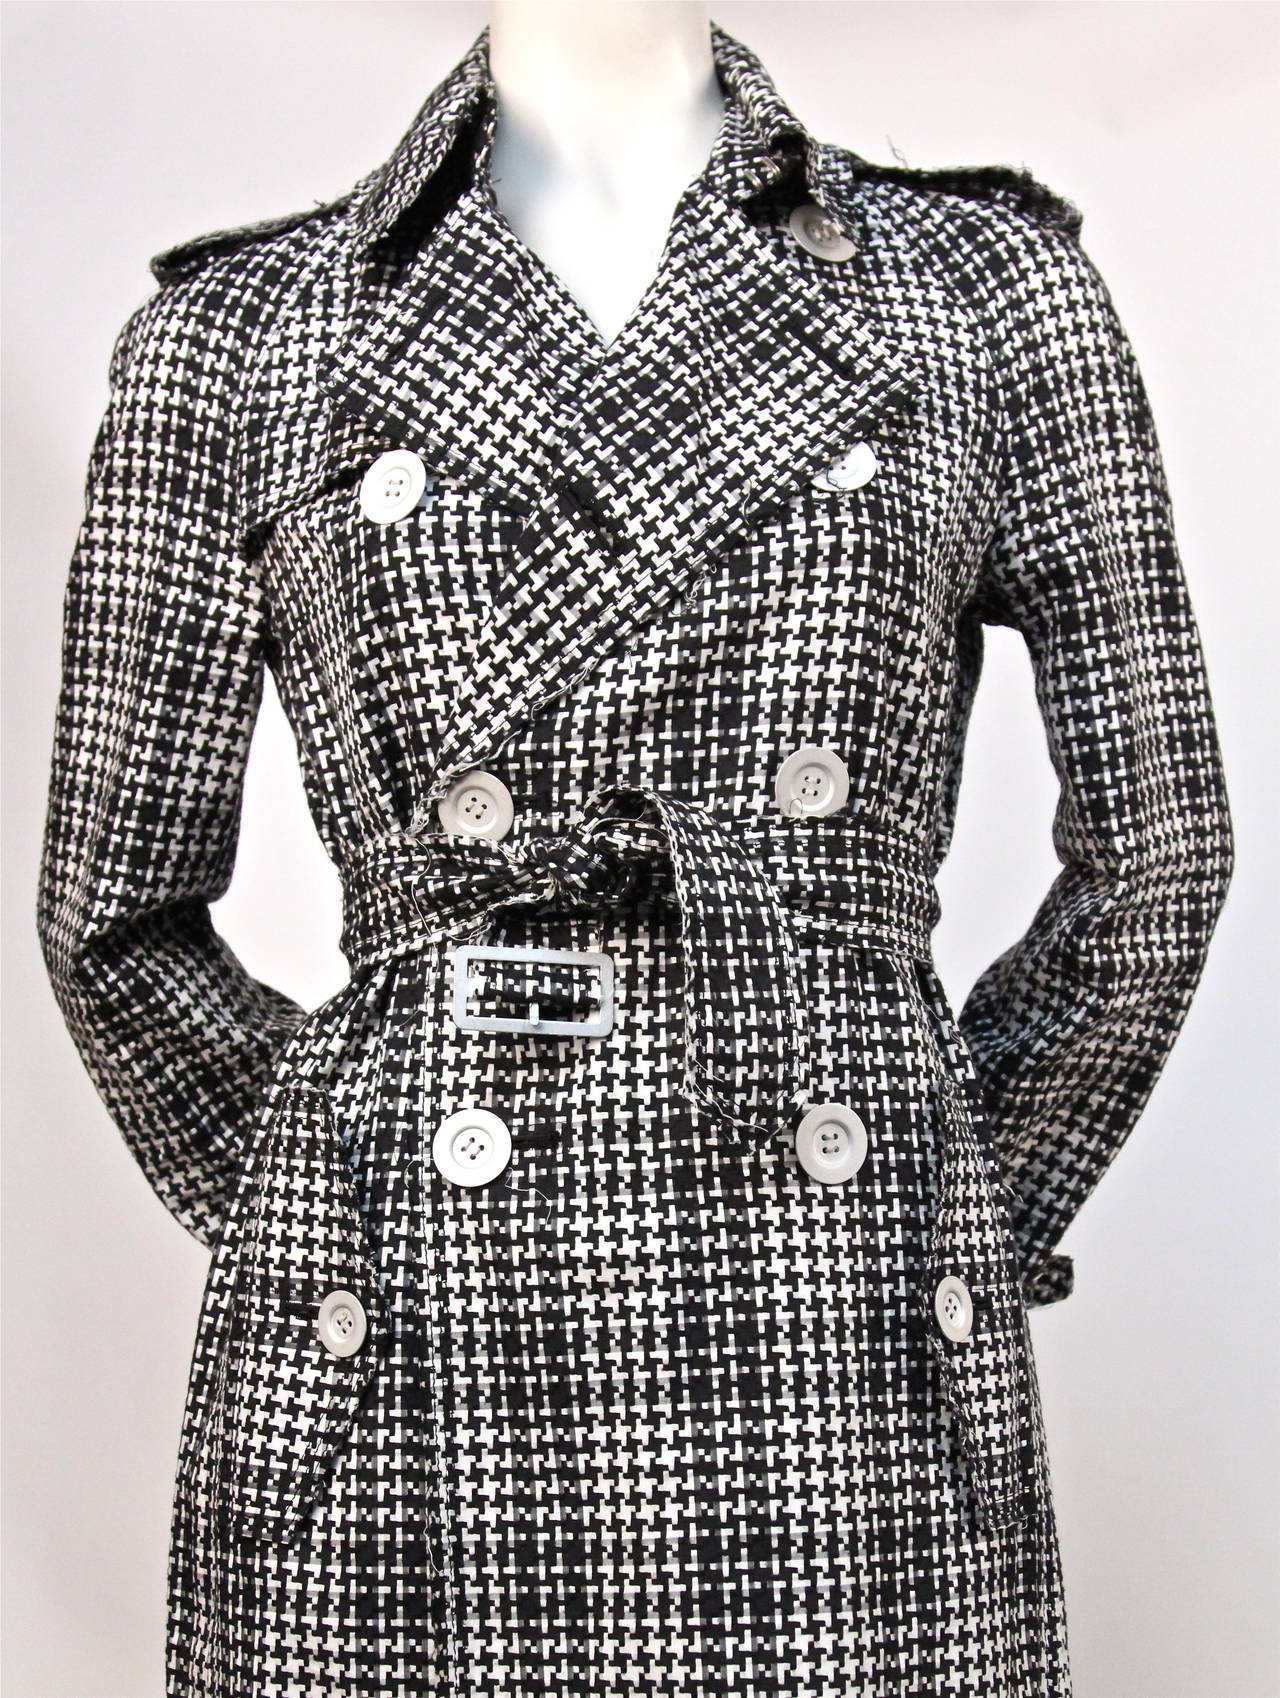 Black and white woven houndstooth check trench coat with unfinished edges and silver buttons from Junya Watanable for Comme des Garcons dating to spring of 2003. Labeled a size 'M'. Approximate measurements: shoulders 15-16